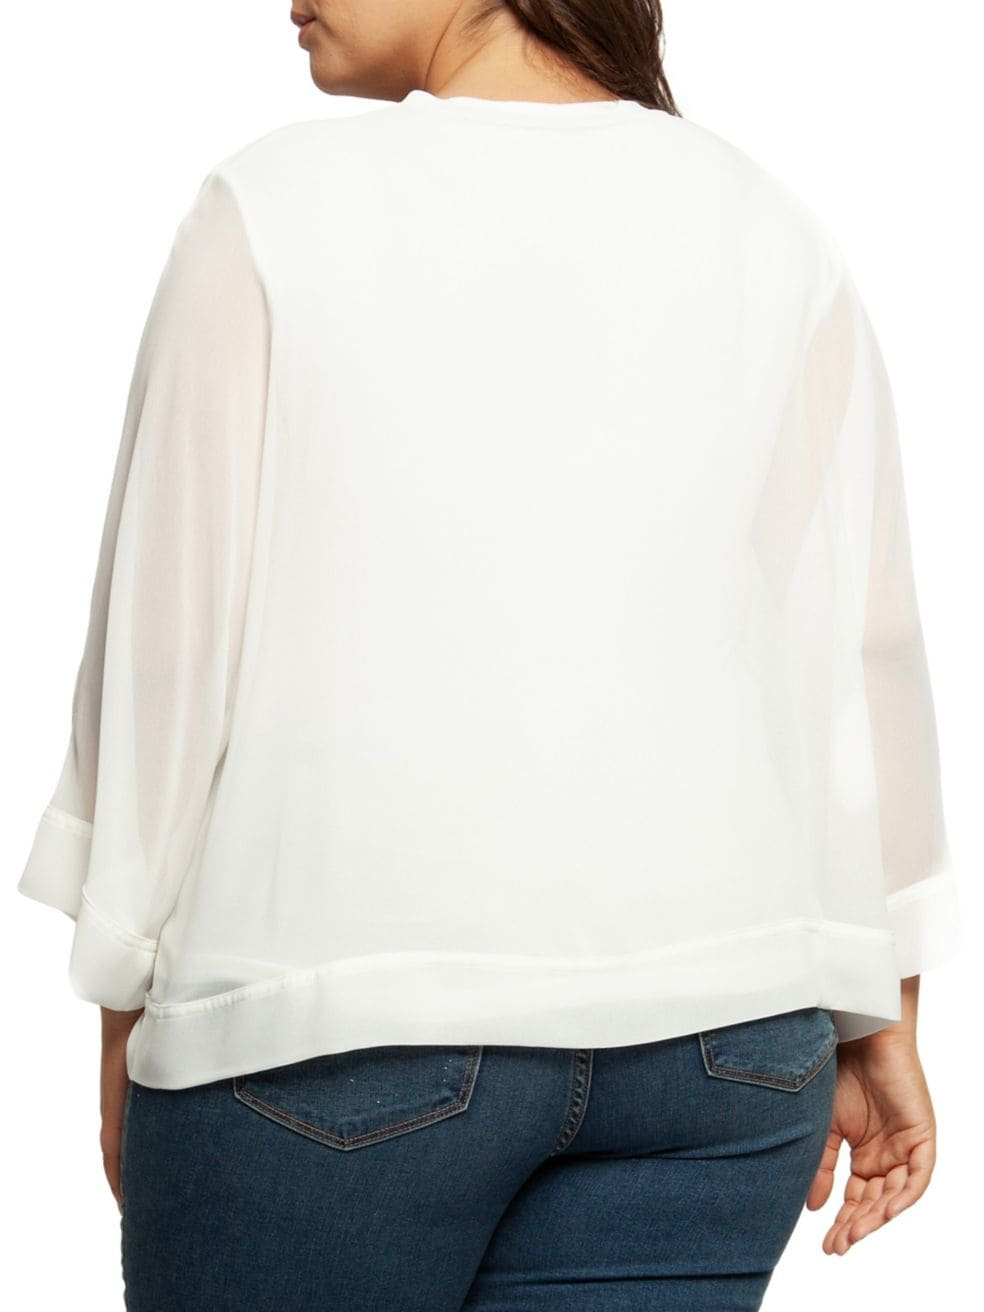 Classic V-neck Blouse - Plus Sizes
Casual top in V-neck design. V-neck Long sleeves Polyester Hand wash Imported SIZE & FIT About 28" from shoulder to hem
Classic V-neck Blouse - Plus Sizes
Casual top in V-neck design. V-neck Long sleeves Polyester Hand wash Imported App. 28" from shoulder to hem.
1373087

$59.99
$59.99
$59.99
blouse, plus skirt, pullover, top, v-neck blouse, v-neck top
Top
Dex Plus



Size: X-Large, 1Xlarge, 2Xlarge, 3Xlarge


Le' Diva Boutique Store